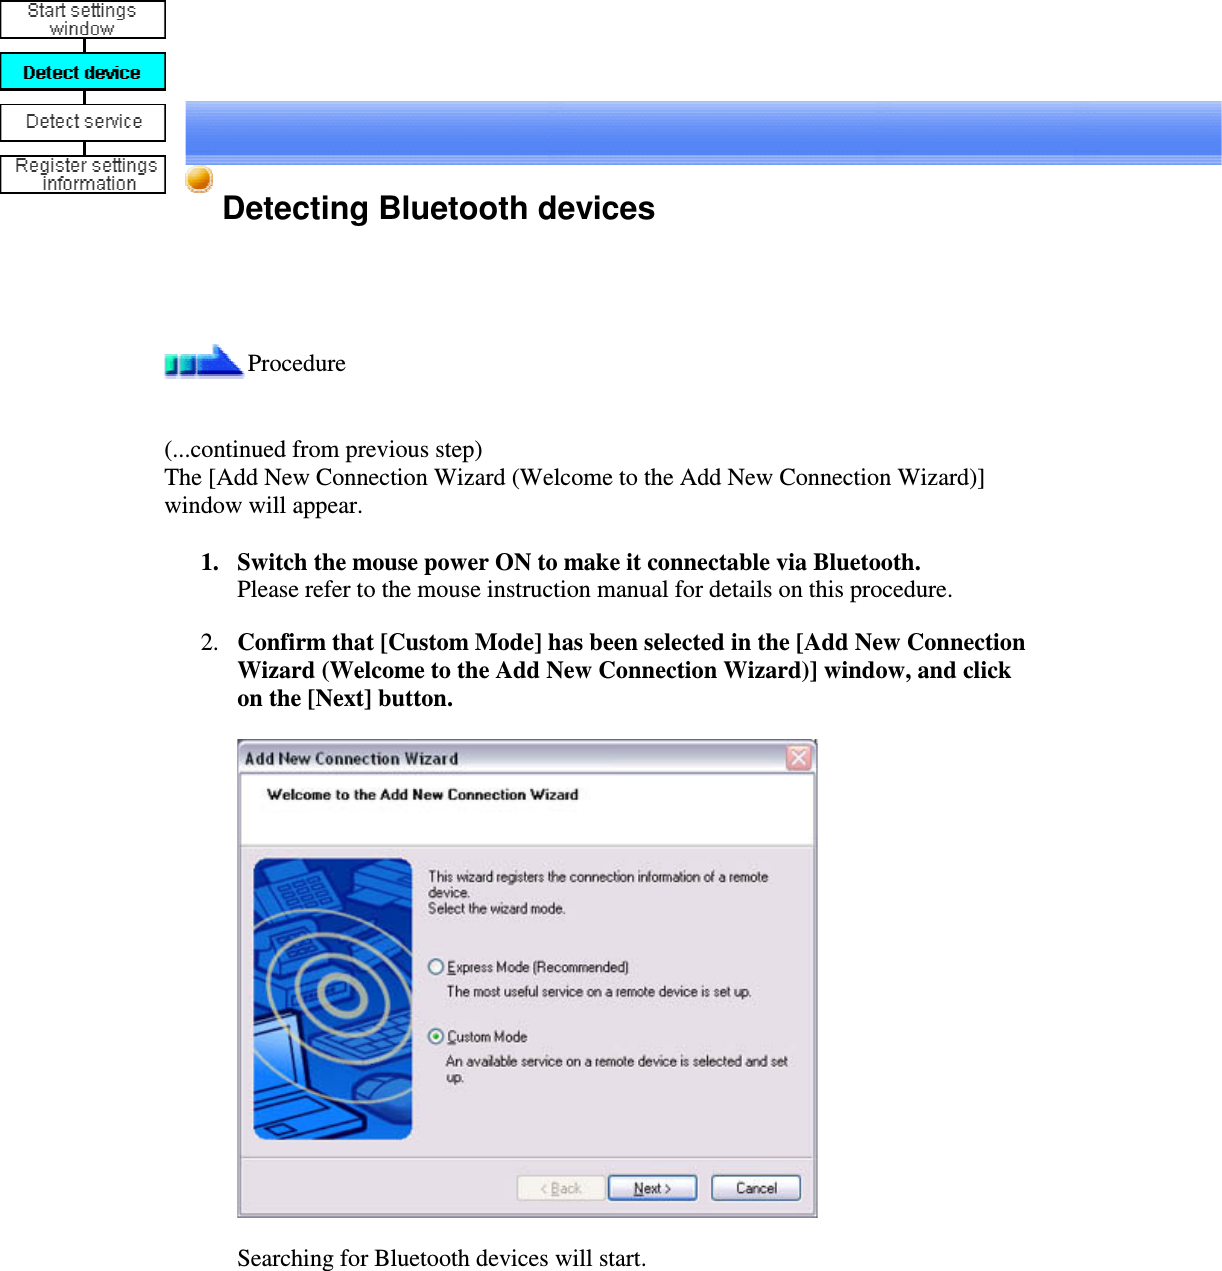 Detecting Bluetooth devicesProcedure(...continued from previous step)The [Add New Connection Wizard (Welcome to the Add New Connection Wizard)]window will appear.1. Switch the mouse power ON to make it connectable via Bluetooth.Please refer to the mouse instruction manual for details on this procedure.2. Confirm that [Custom Mode] has been selected in the [Add New ConnectionWizard (Welcome to the Add New Connection Wizard)] window, and clickon the [Next] button.Searching for Bluetooth devices will start.